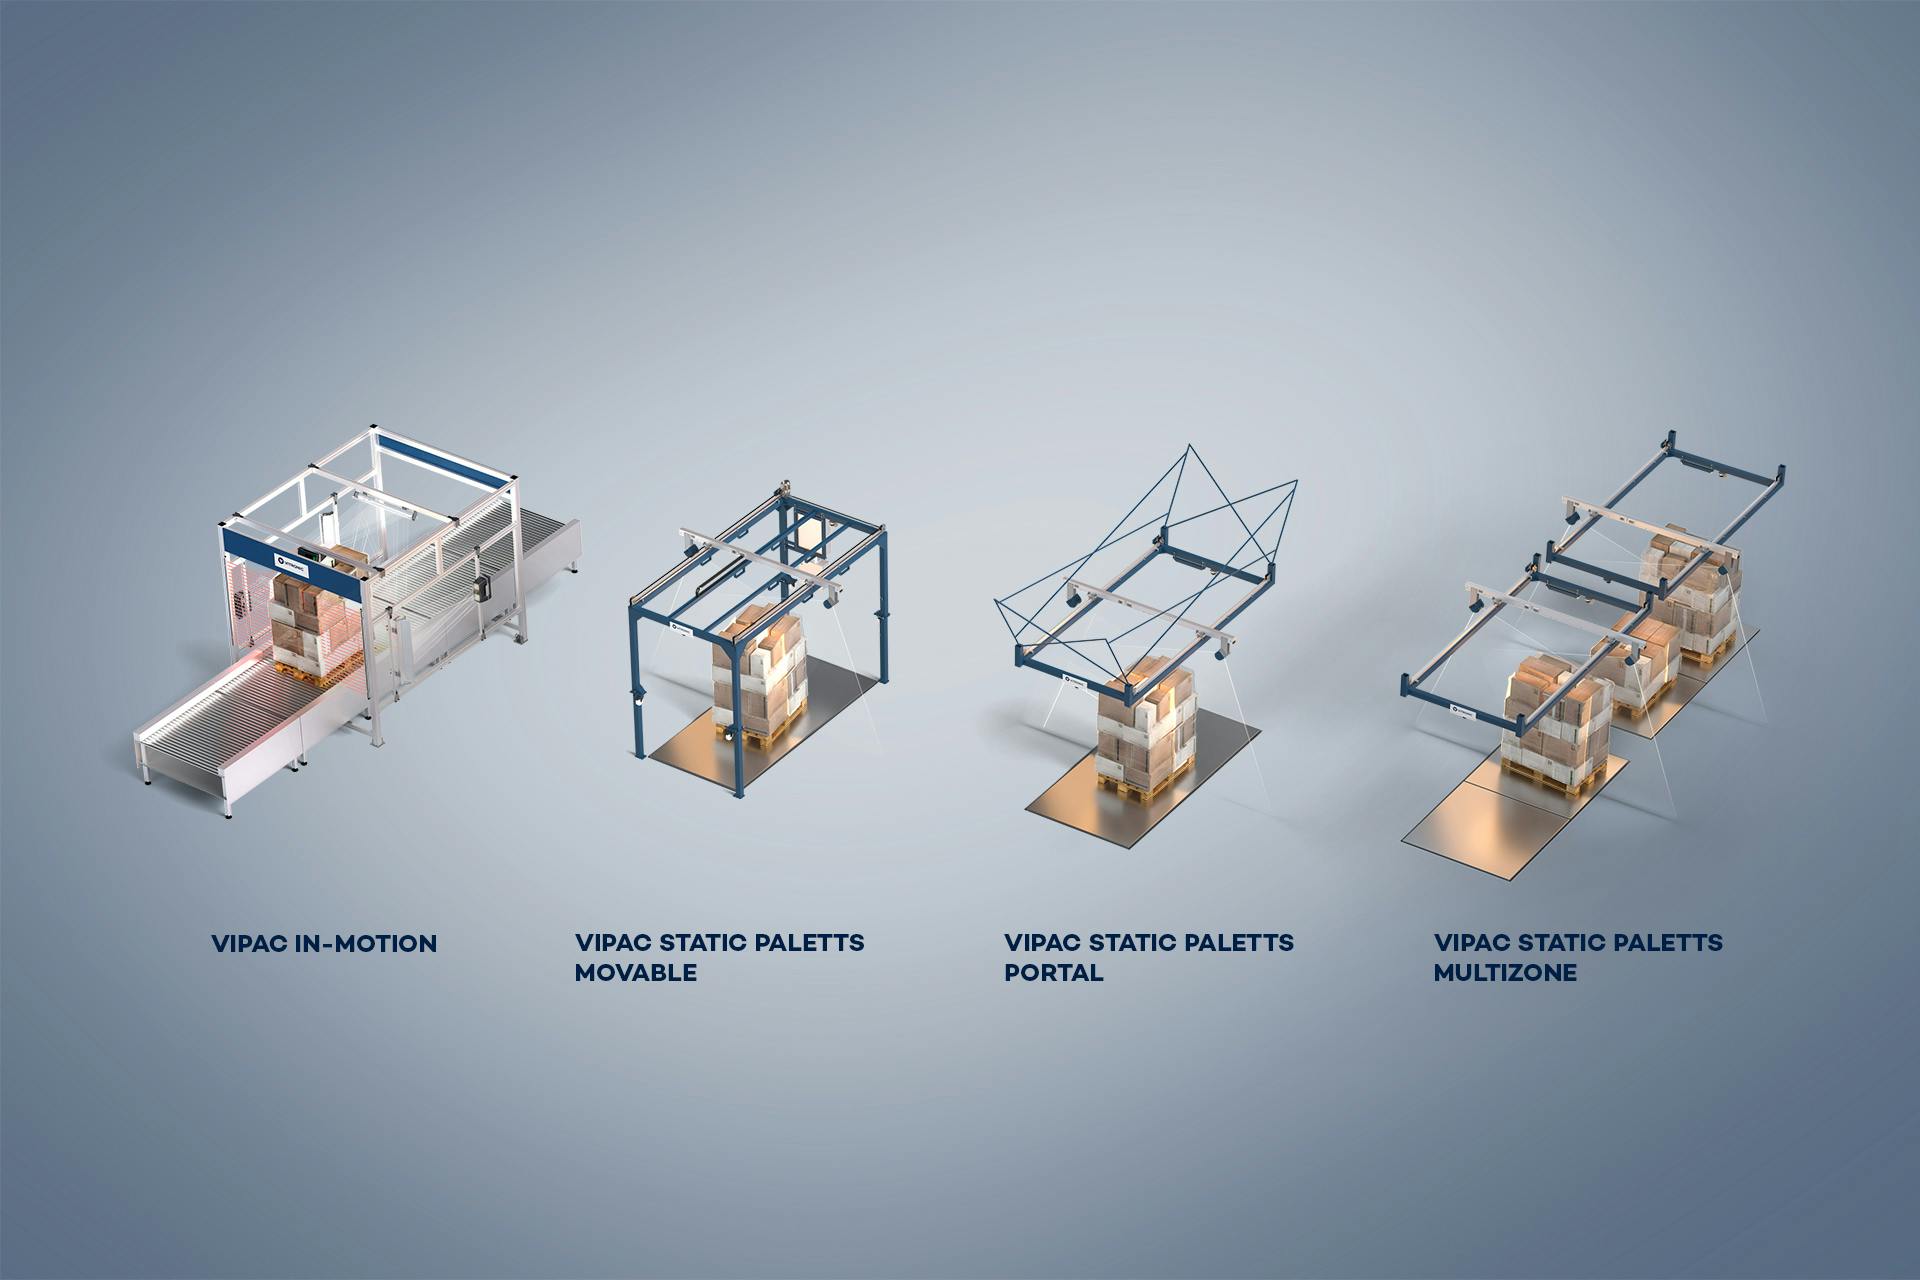 The flexible VIPAC system family from VITRONIC optimises processes in the measurement of pallets.